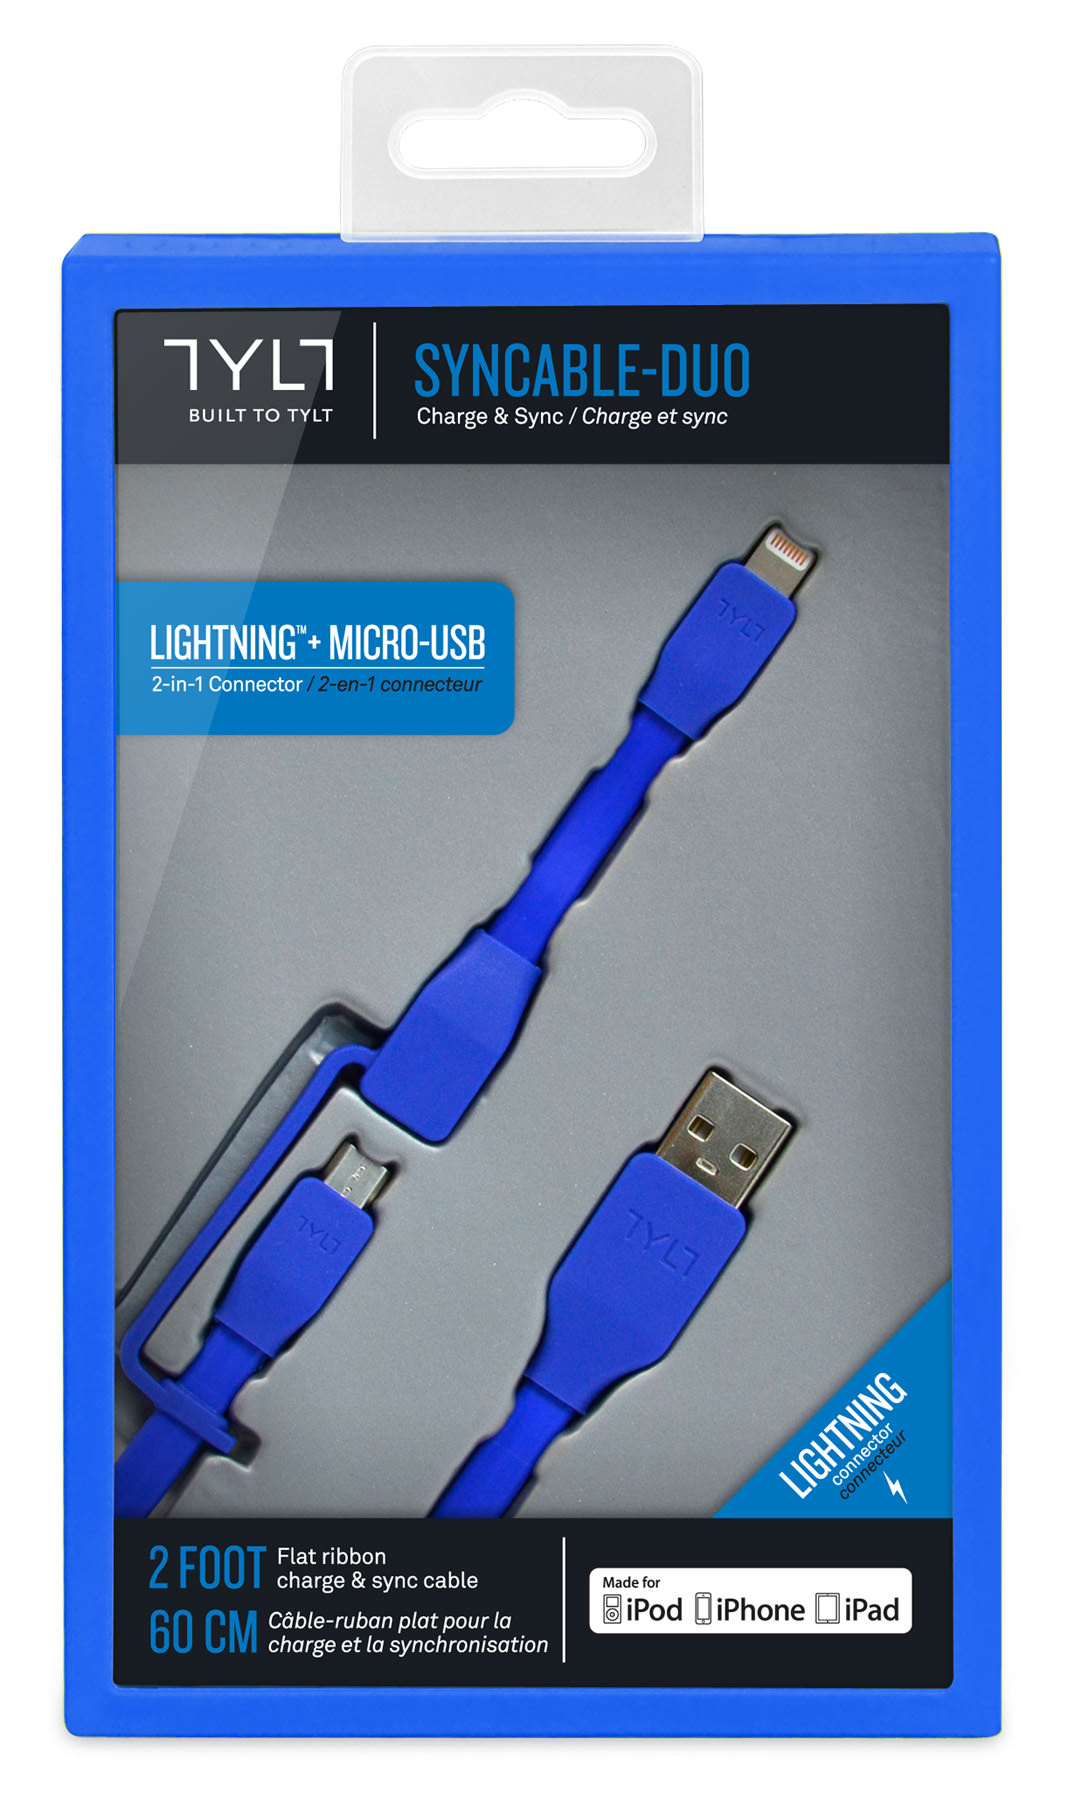 TYLT SYNCABLE DUO 06